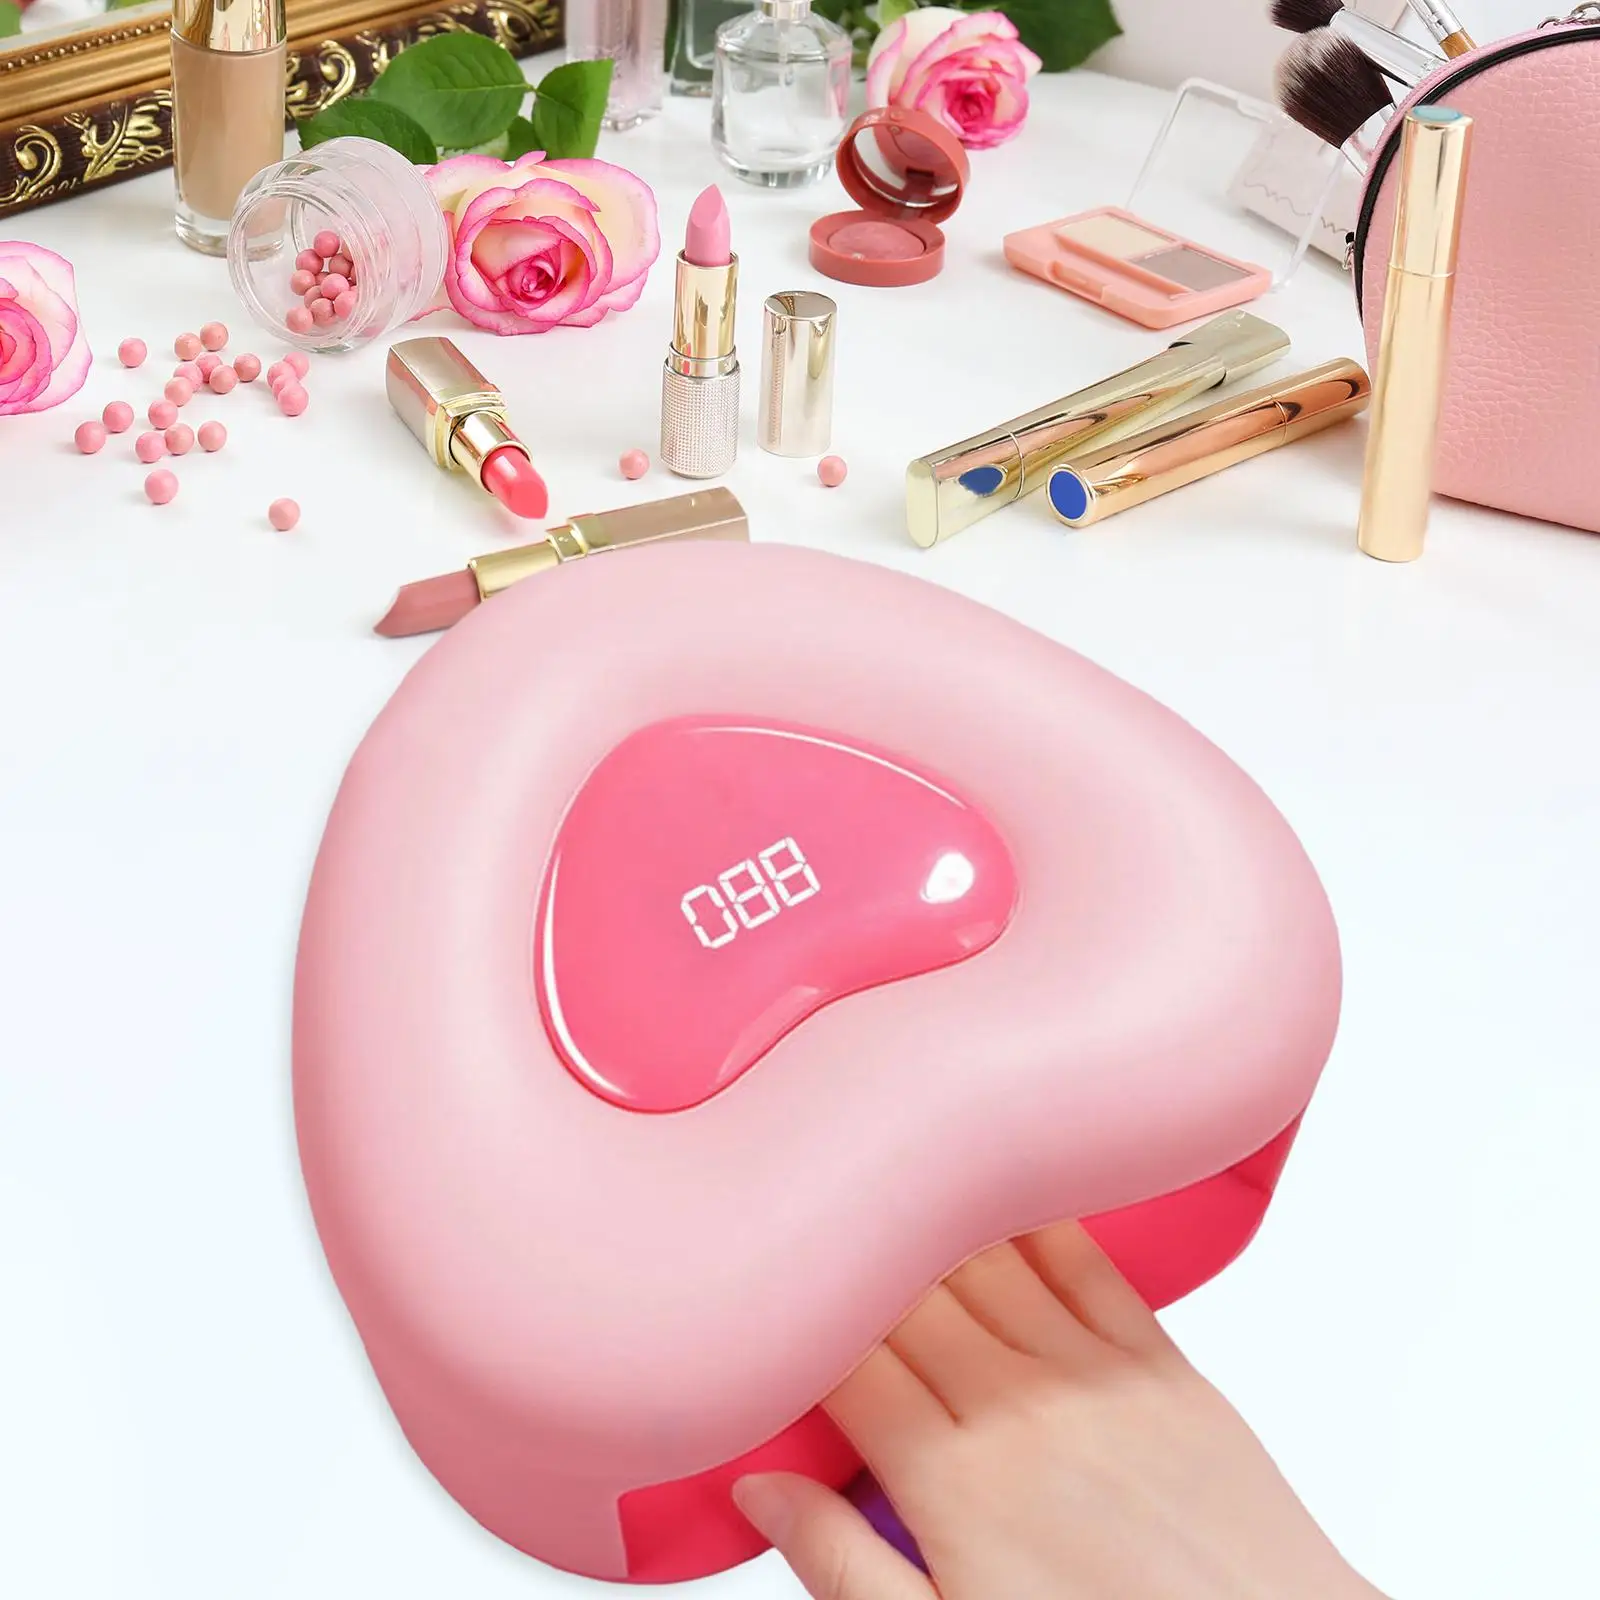 LED Nail Lamp 280W Nail Art Tools Professional 53 Lamp Beads Manicure Pink Nail Dryer Nail Light for Gel Nail for Starters Salon